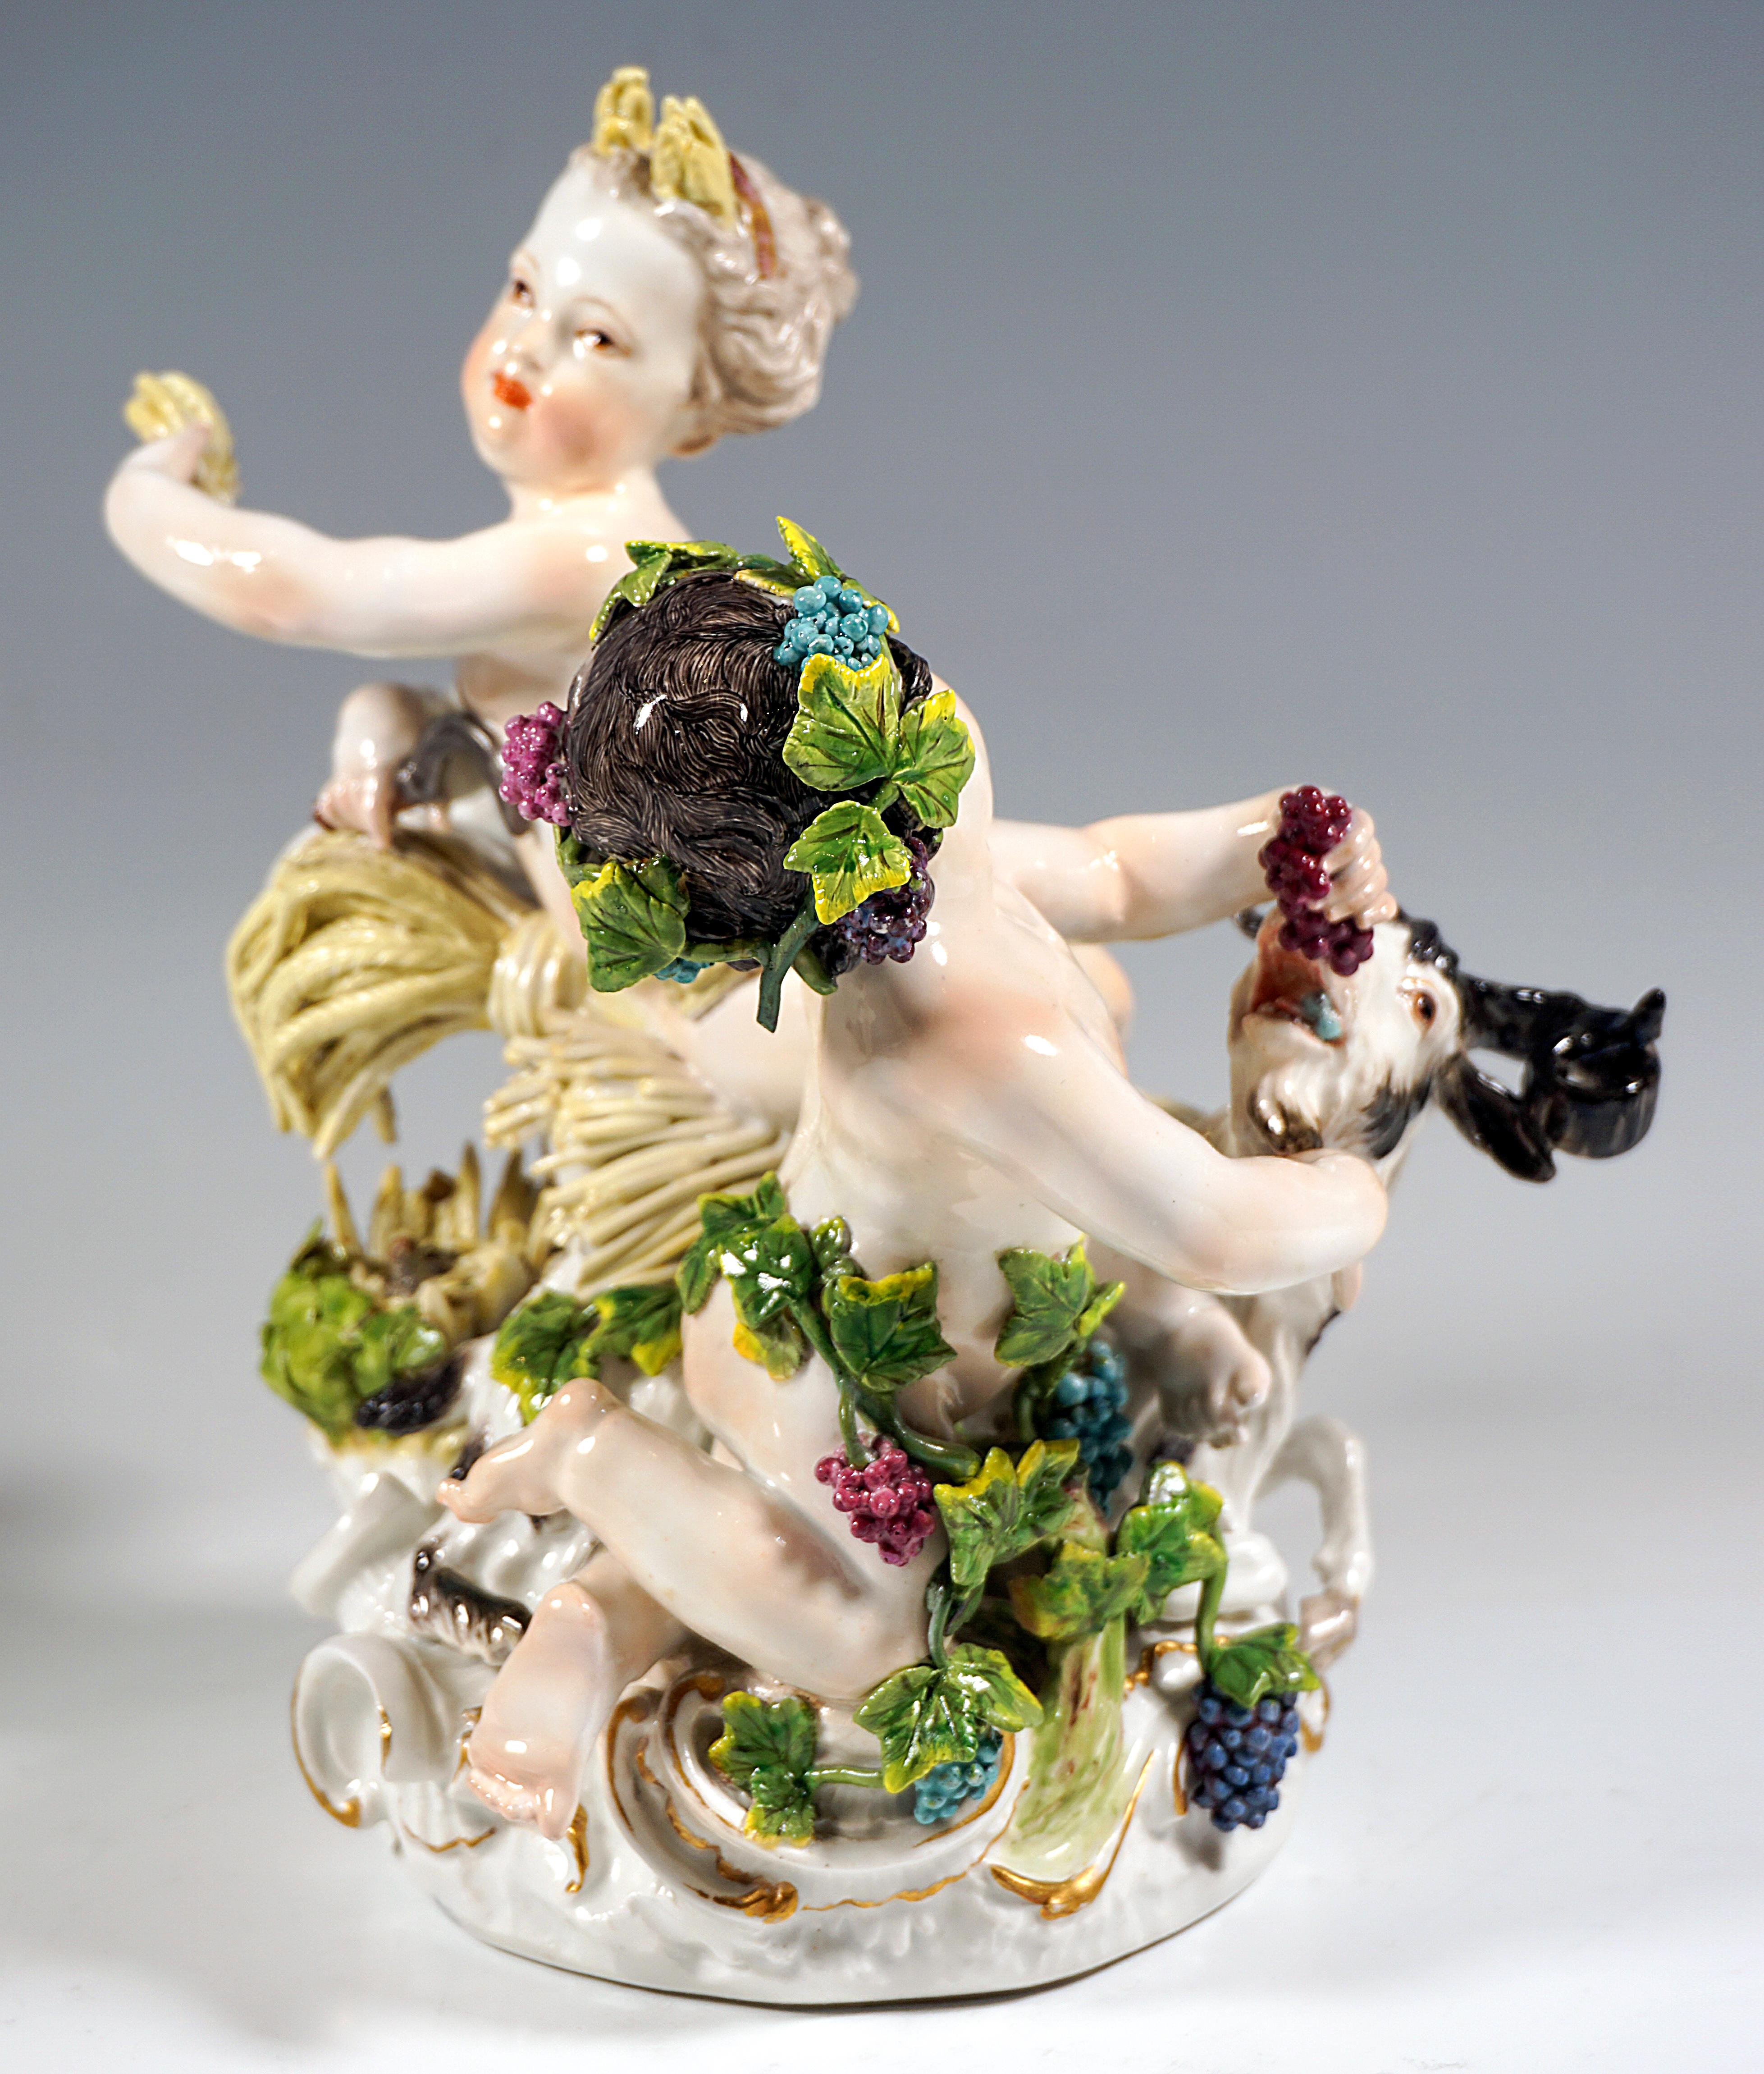 Meissen Porcelain Group From The Time Of Origin:
Two naked cupids and a ram on a rocaille rock, depicting the seasons of summer and autumn:
Summer bedded on a bundle of ears of corn, ears of corn in his hair, holding up a handful of corn, in the